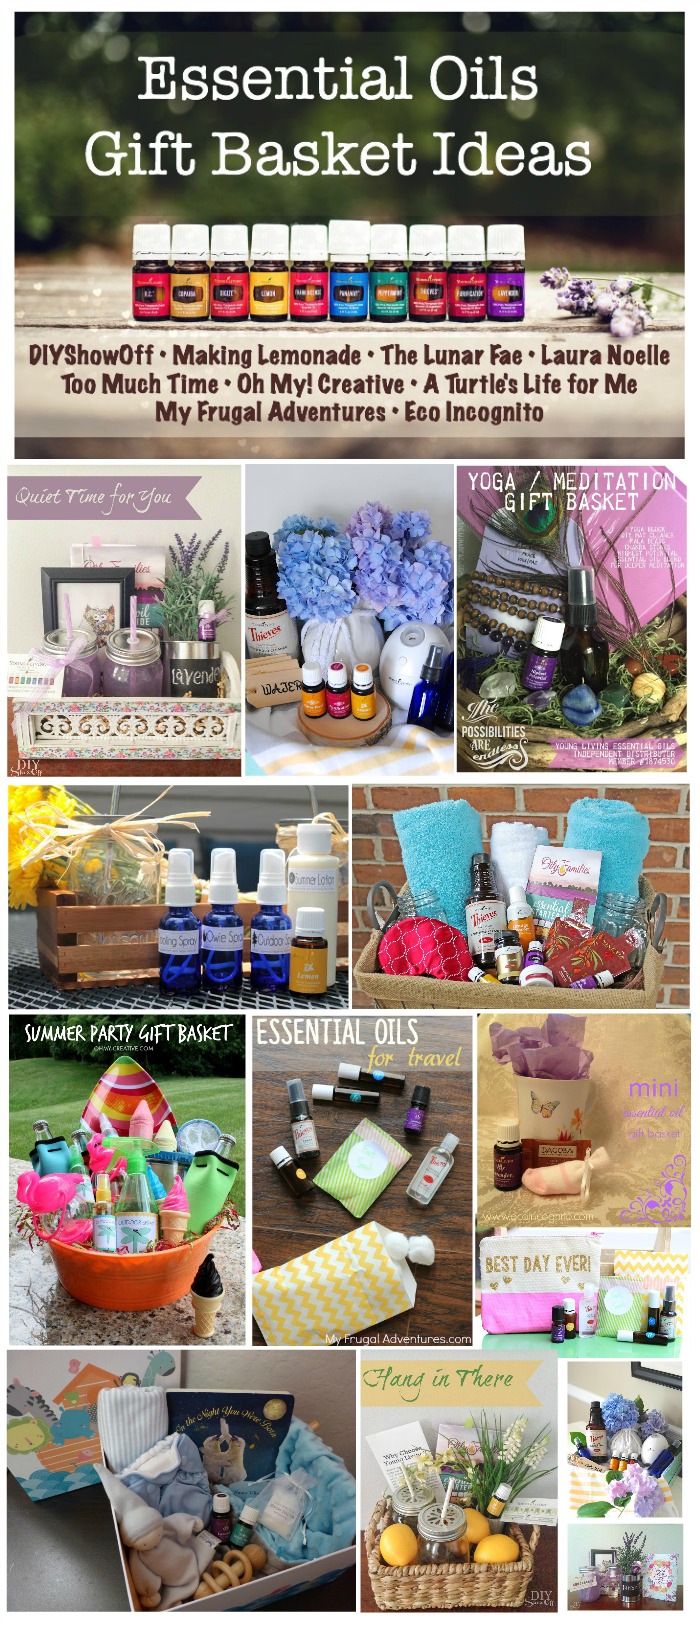 What perfect way to share your love for essential oils than to give them as gifts. Here you will find great ways to create an Essential Oils Gift Basket for many occasions!   |   OHMY-CREATIVE.COM